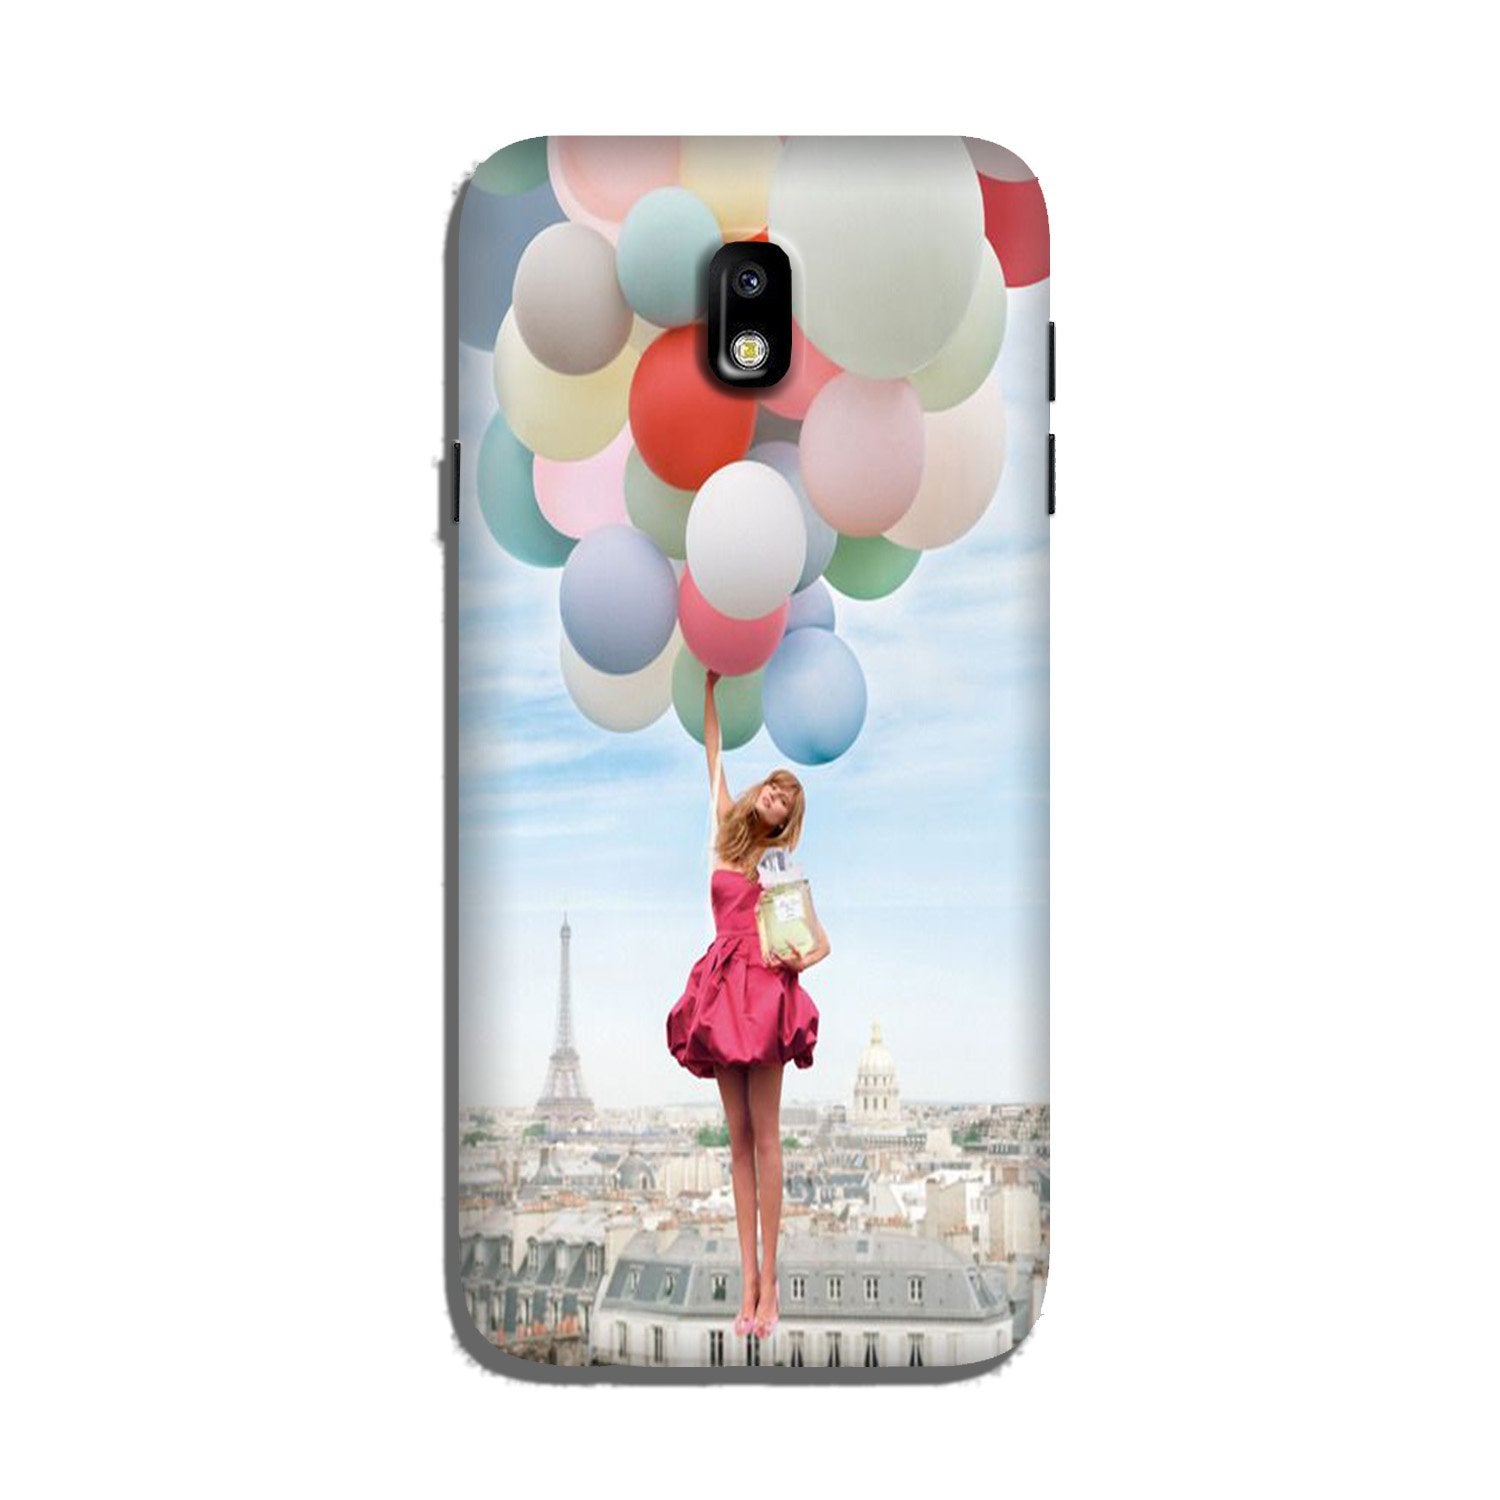 Girl with Baloon Case for Galaxy J7 Pro